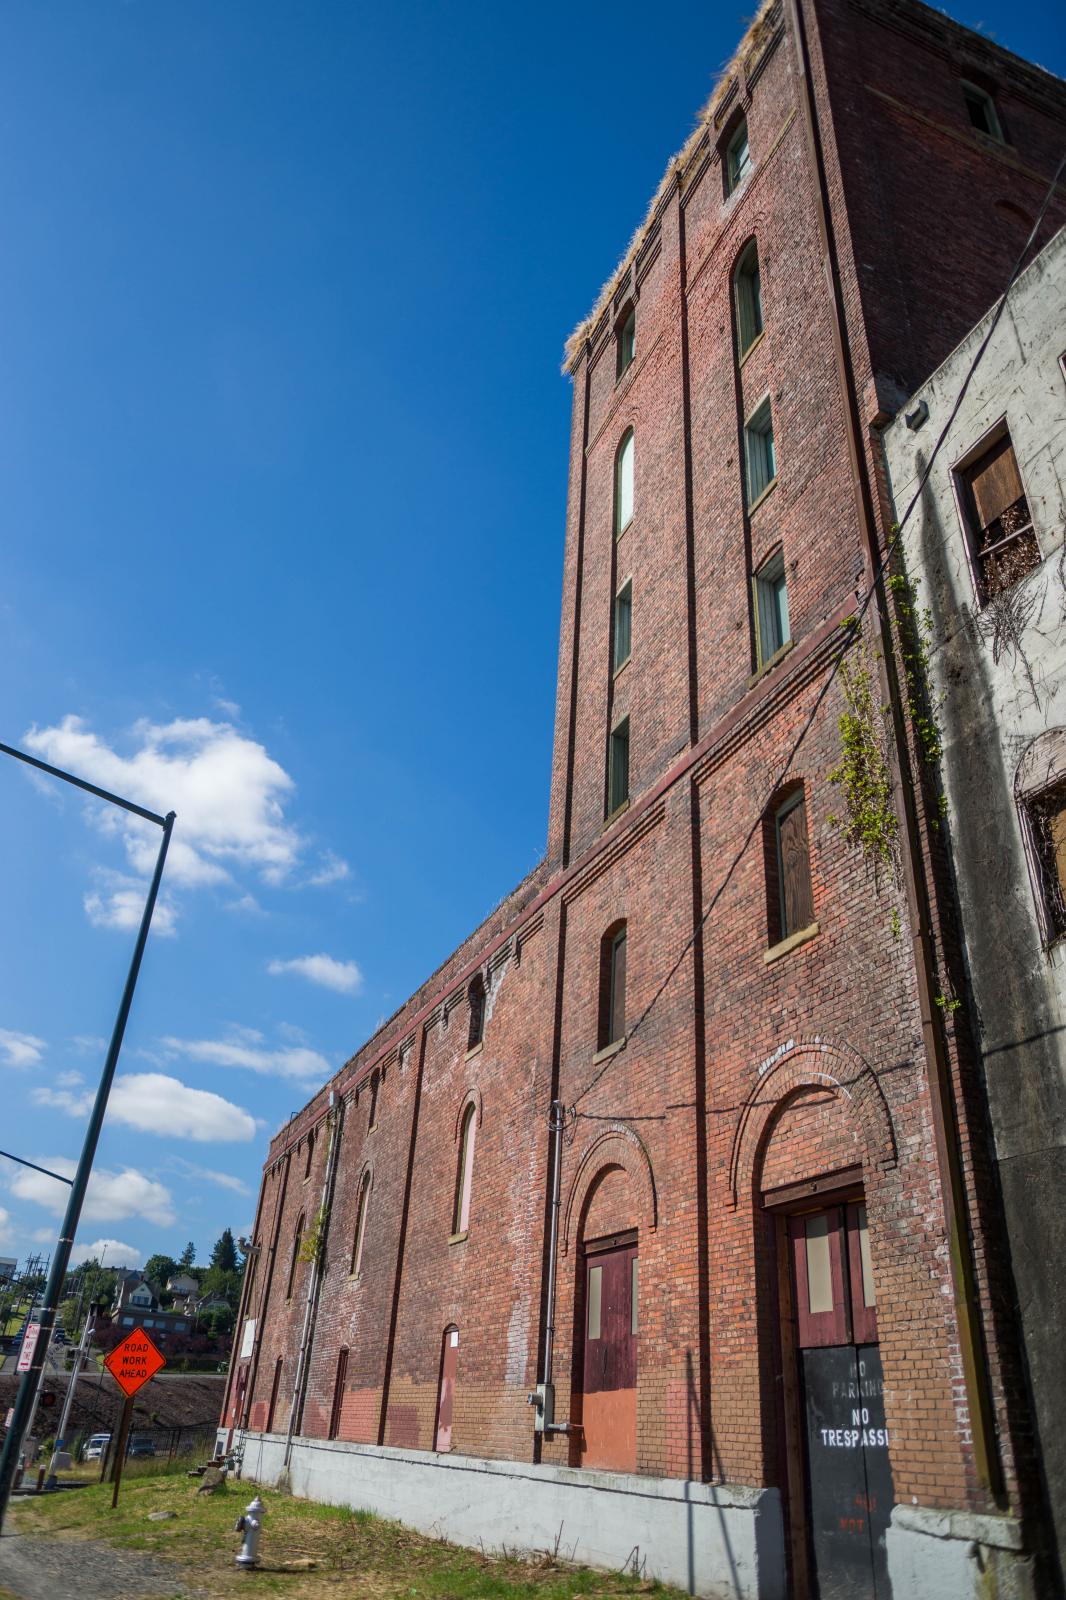 Image showing the Puget Sound Brewing warehouse and brick tower 